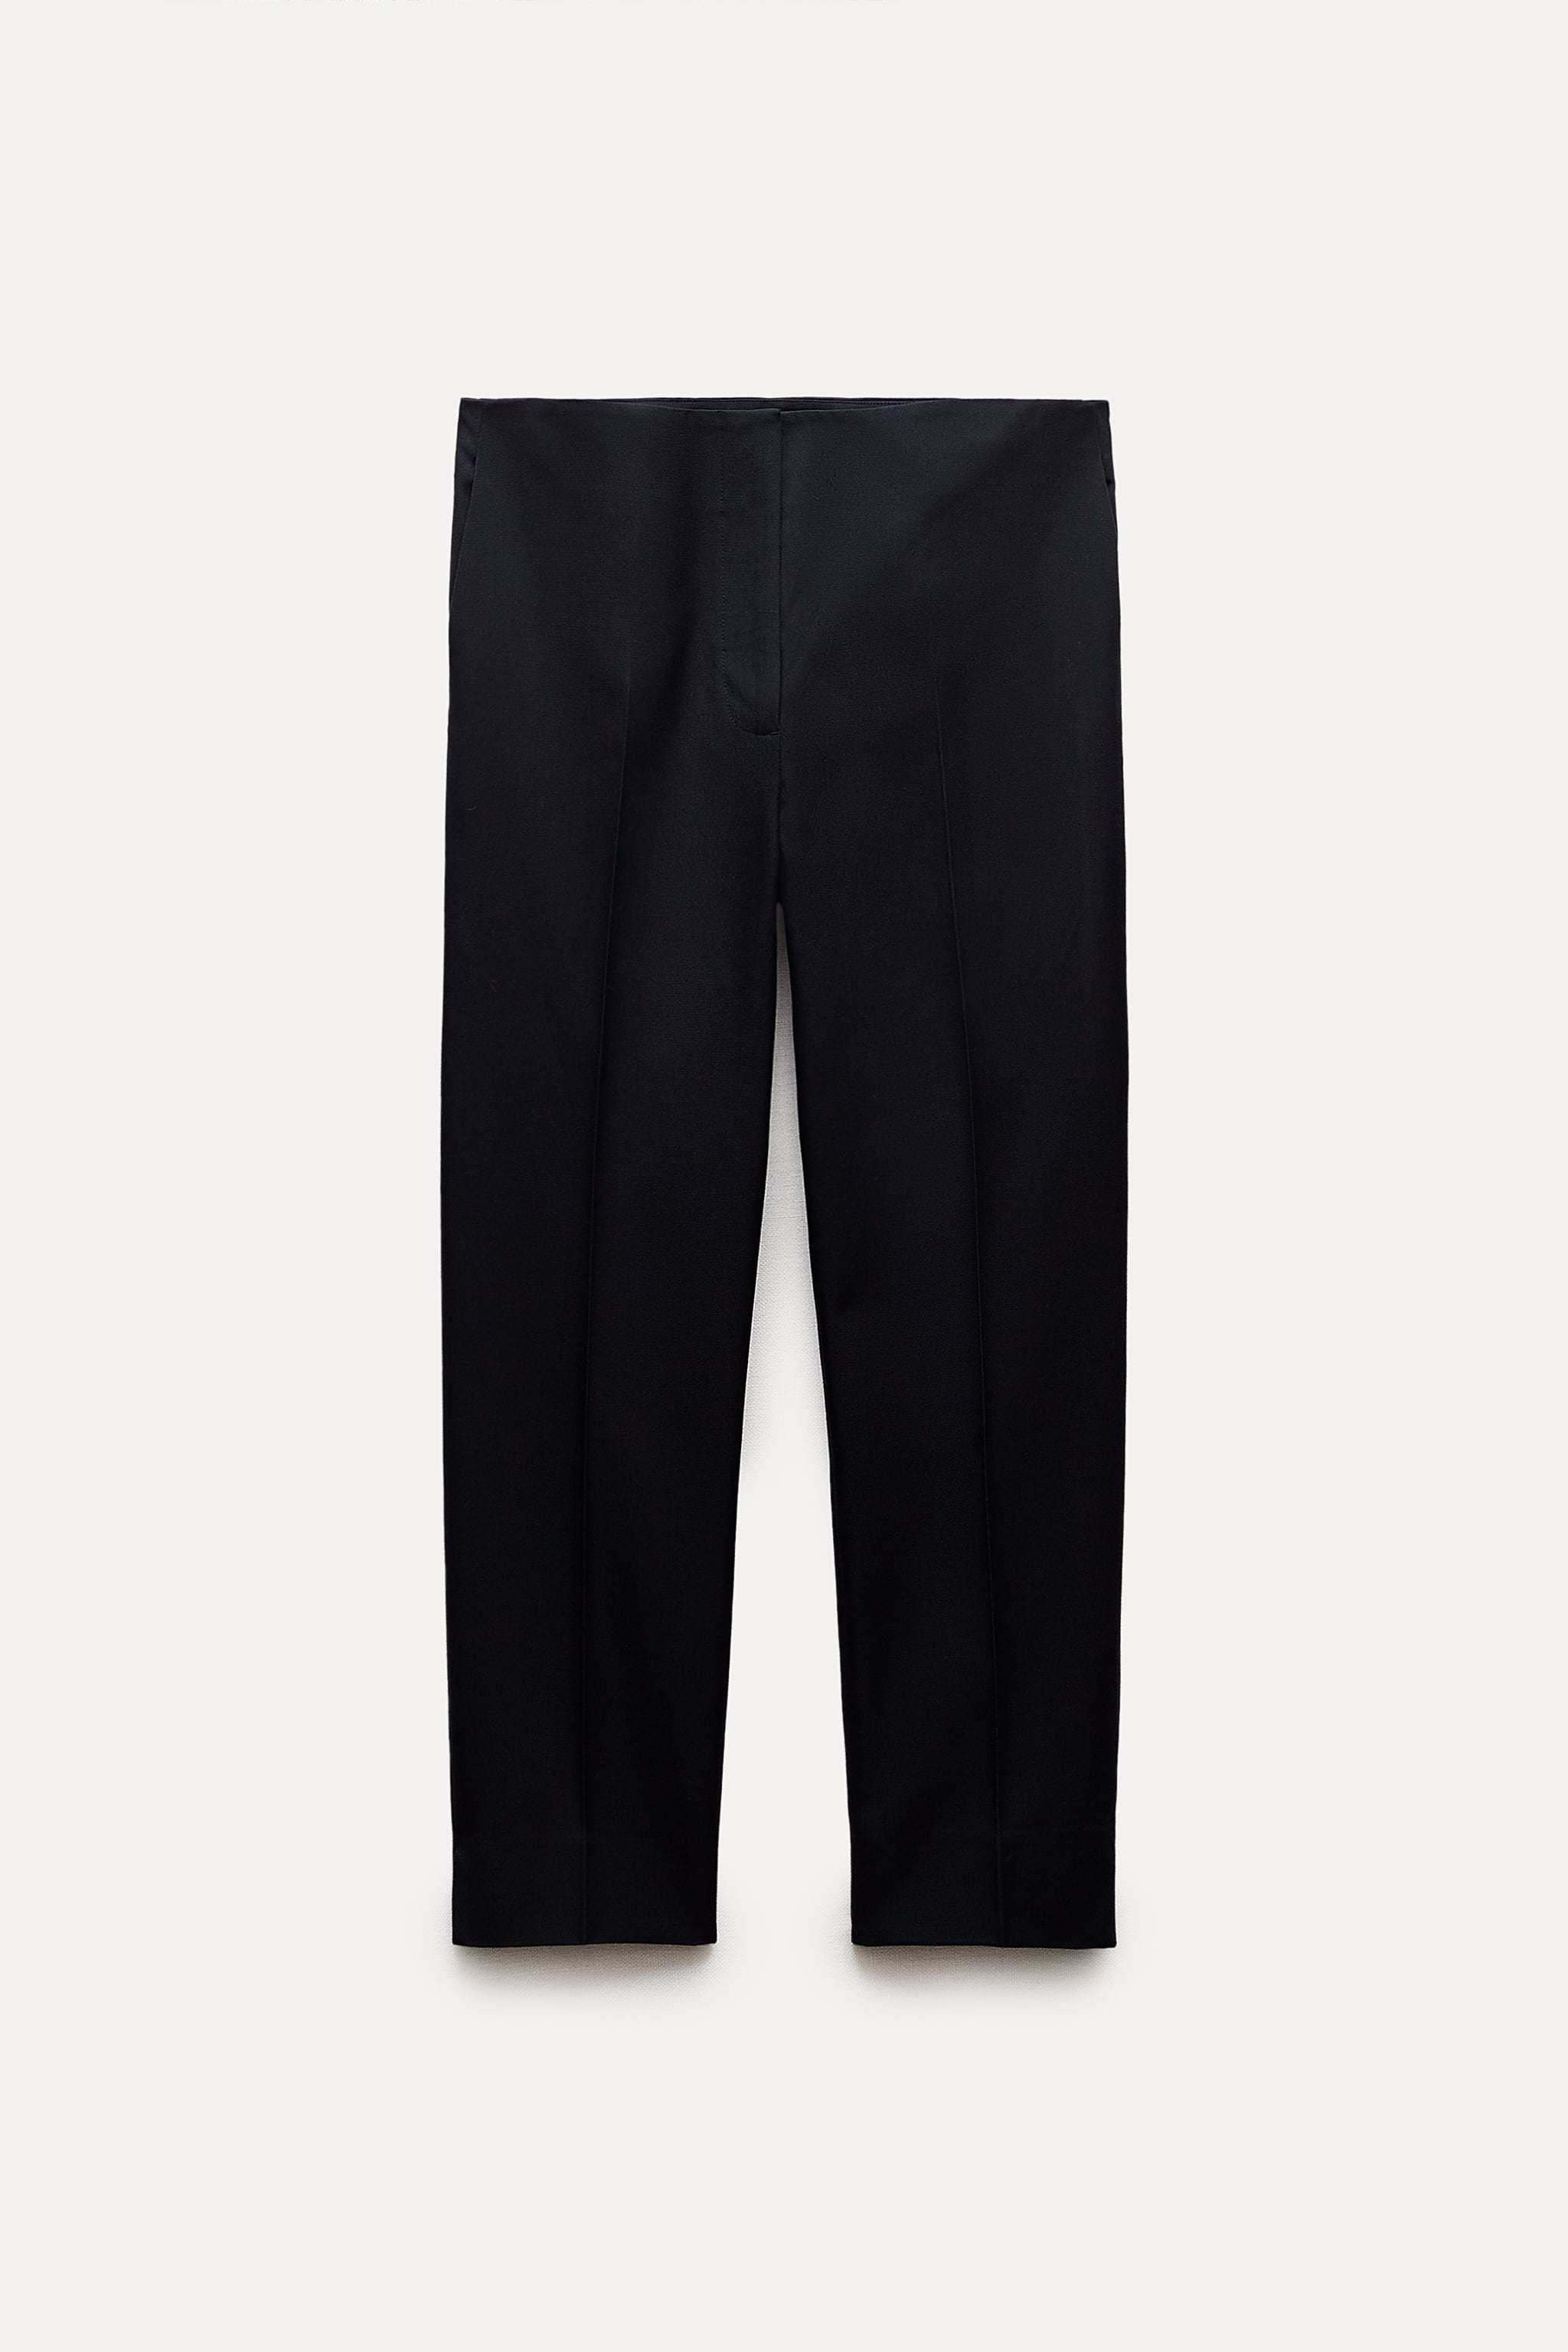 ZW COLLECTION STRAIGHT LEG ANKLE PANTS